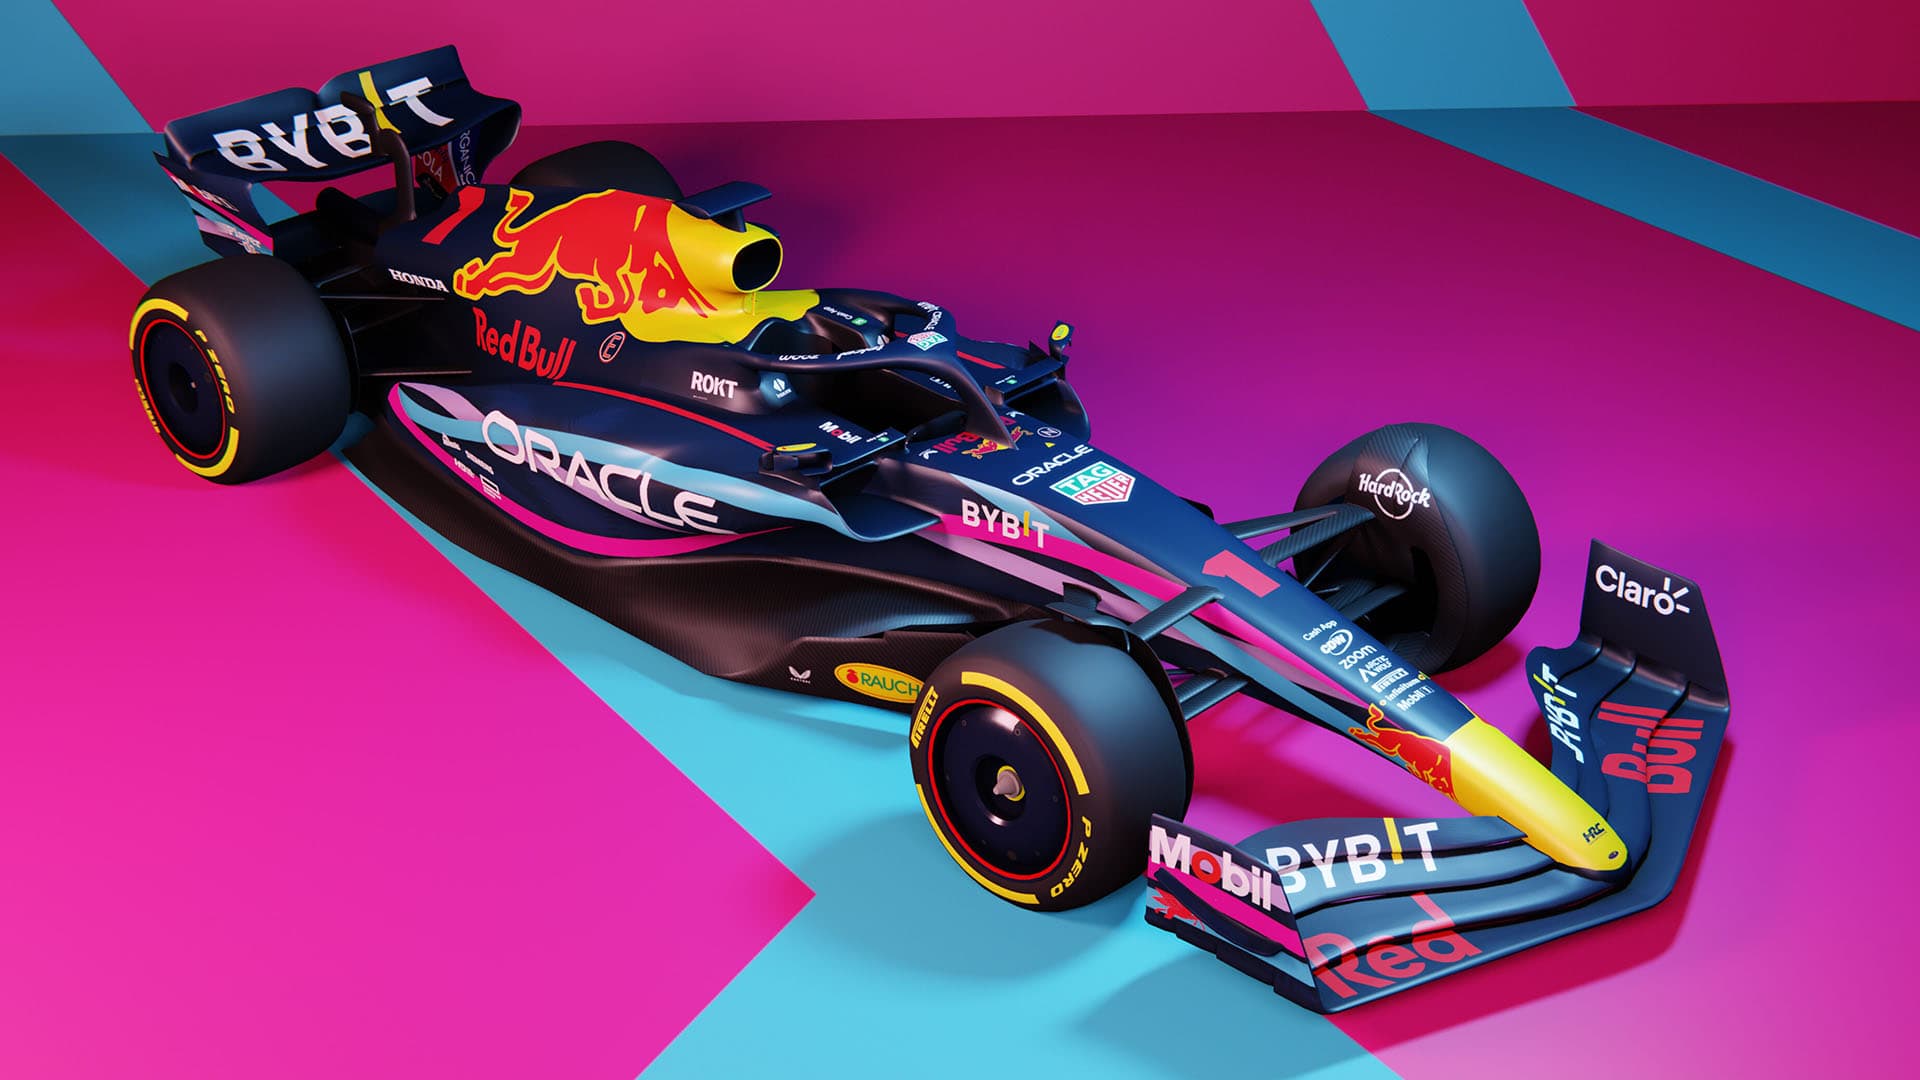 Red Bull To Make Their Mark With Miami-Inspired Livery